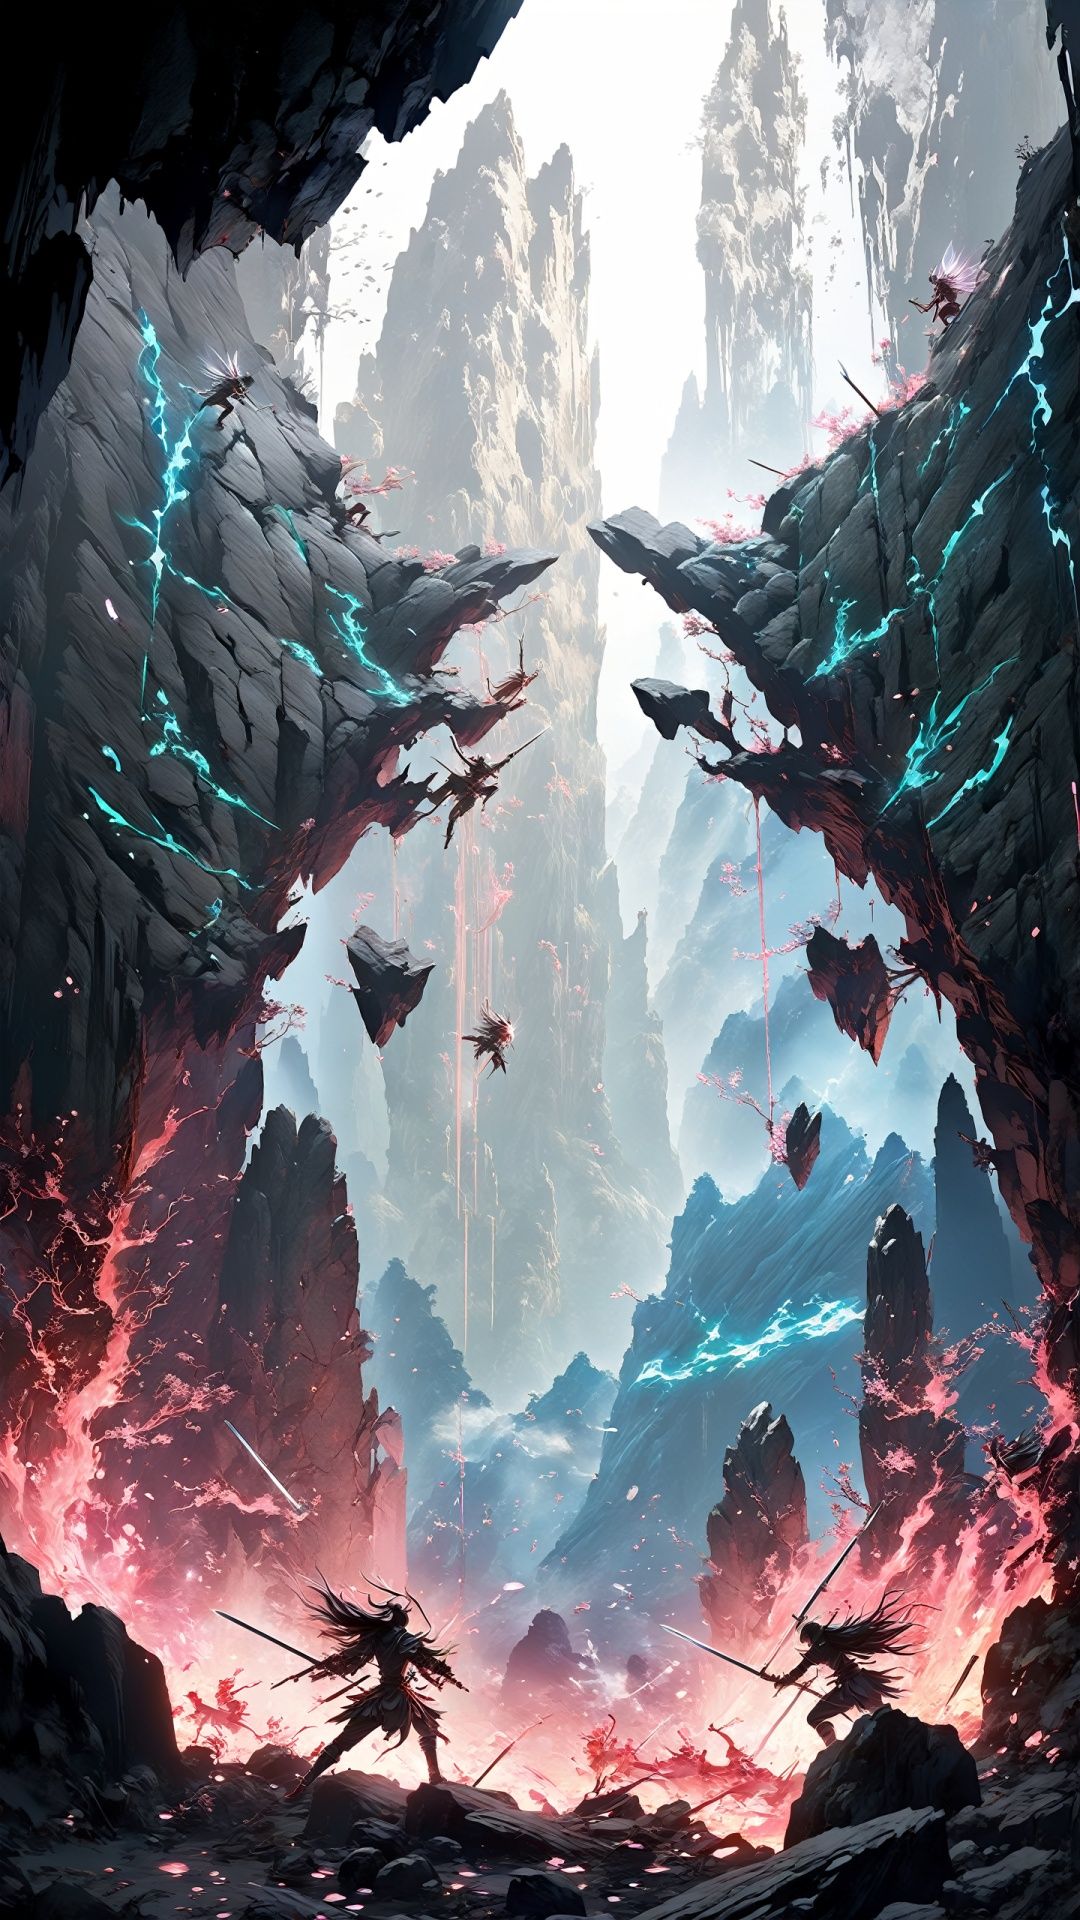  (Chinese fantasy style)(Hyperrealistic game thick paint style: 1.5) Complex details, scenes close-up sword fairy duel, in a small space on a mountain or cliff, two sword fairies are preparing for a fierce sword duel. Their swords glowed with silver, and the surrounding rocks were cut into pieces by the sword